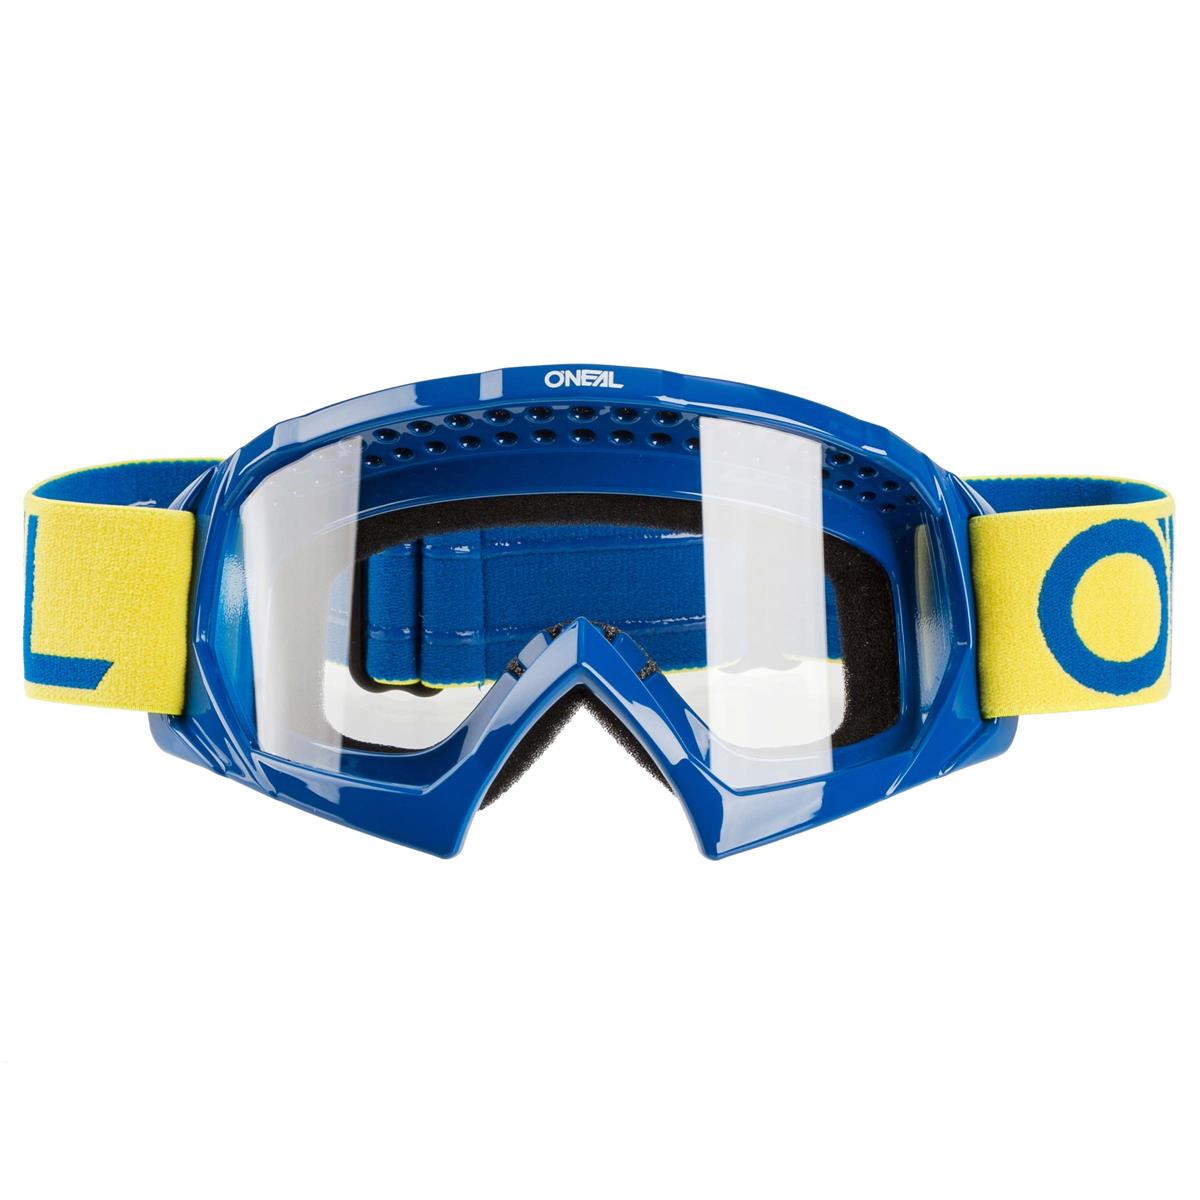 O 'Neal b10 Solid Youth enfants Goggle MX DH lunettes Bleu/Clair ONEAL 